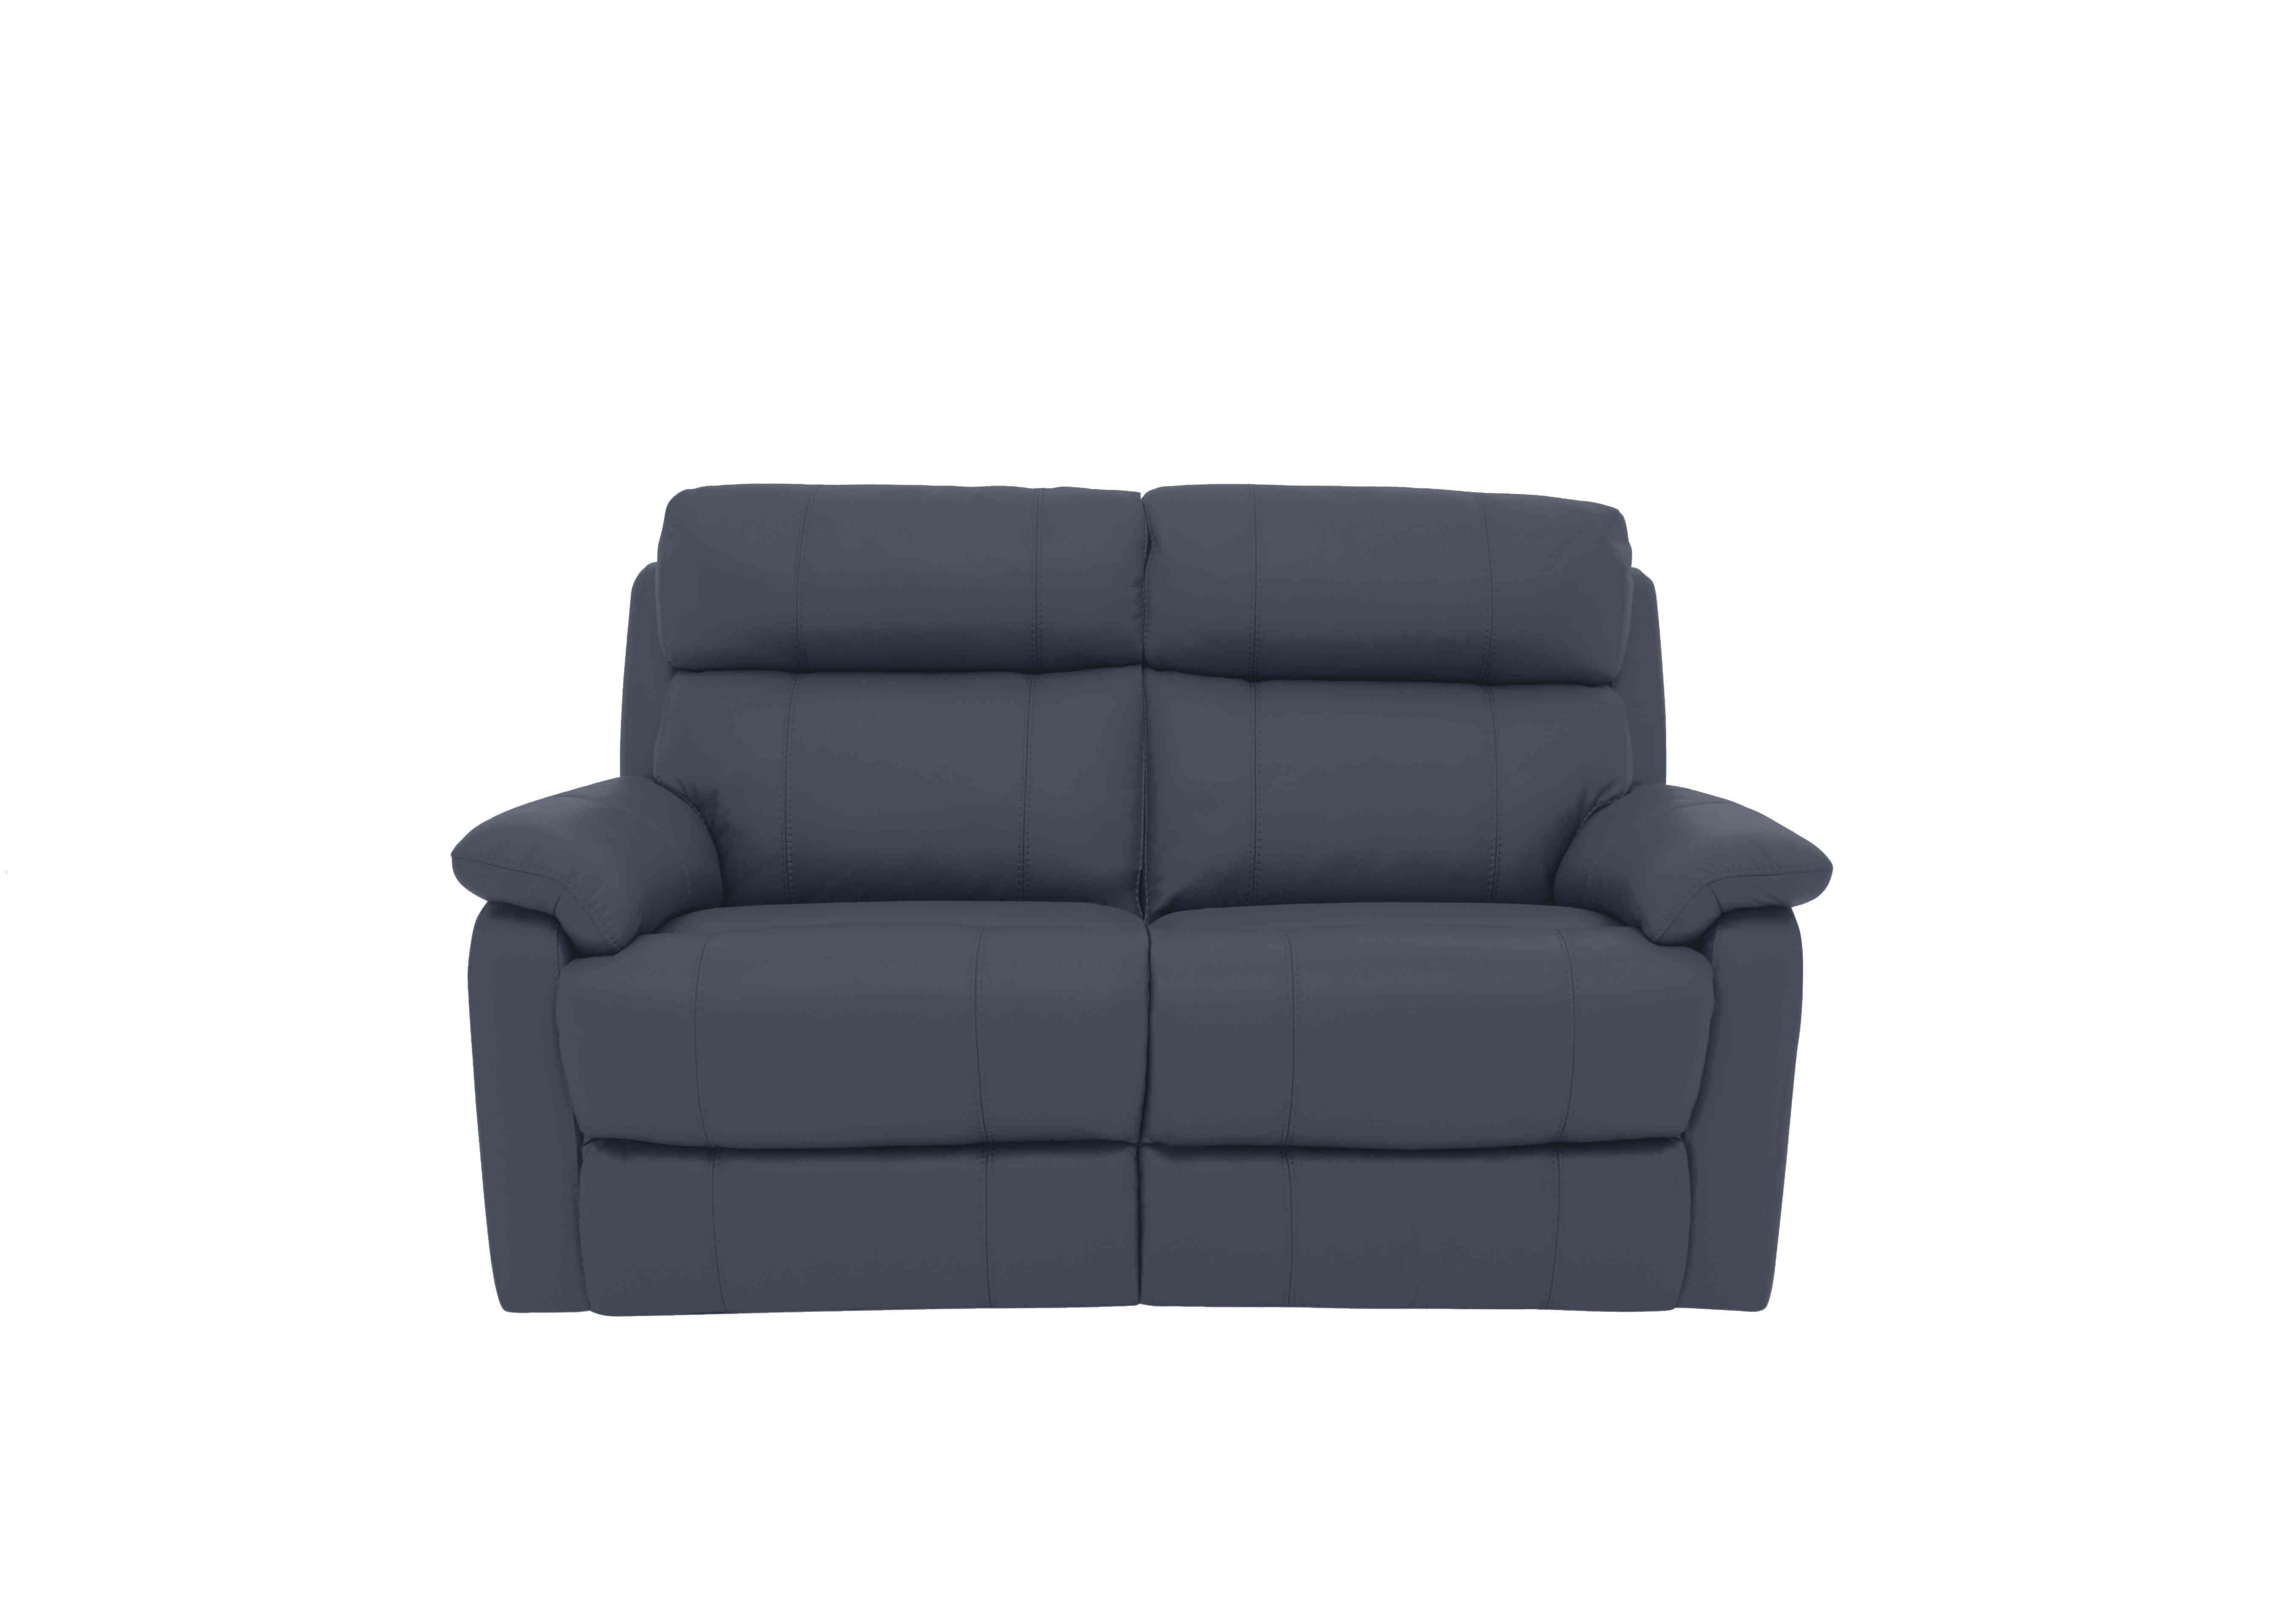 Relax Station Komodo 2 Seater Power Leather Sofa in Bv-313e Ocean Blue on Furniture Village